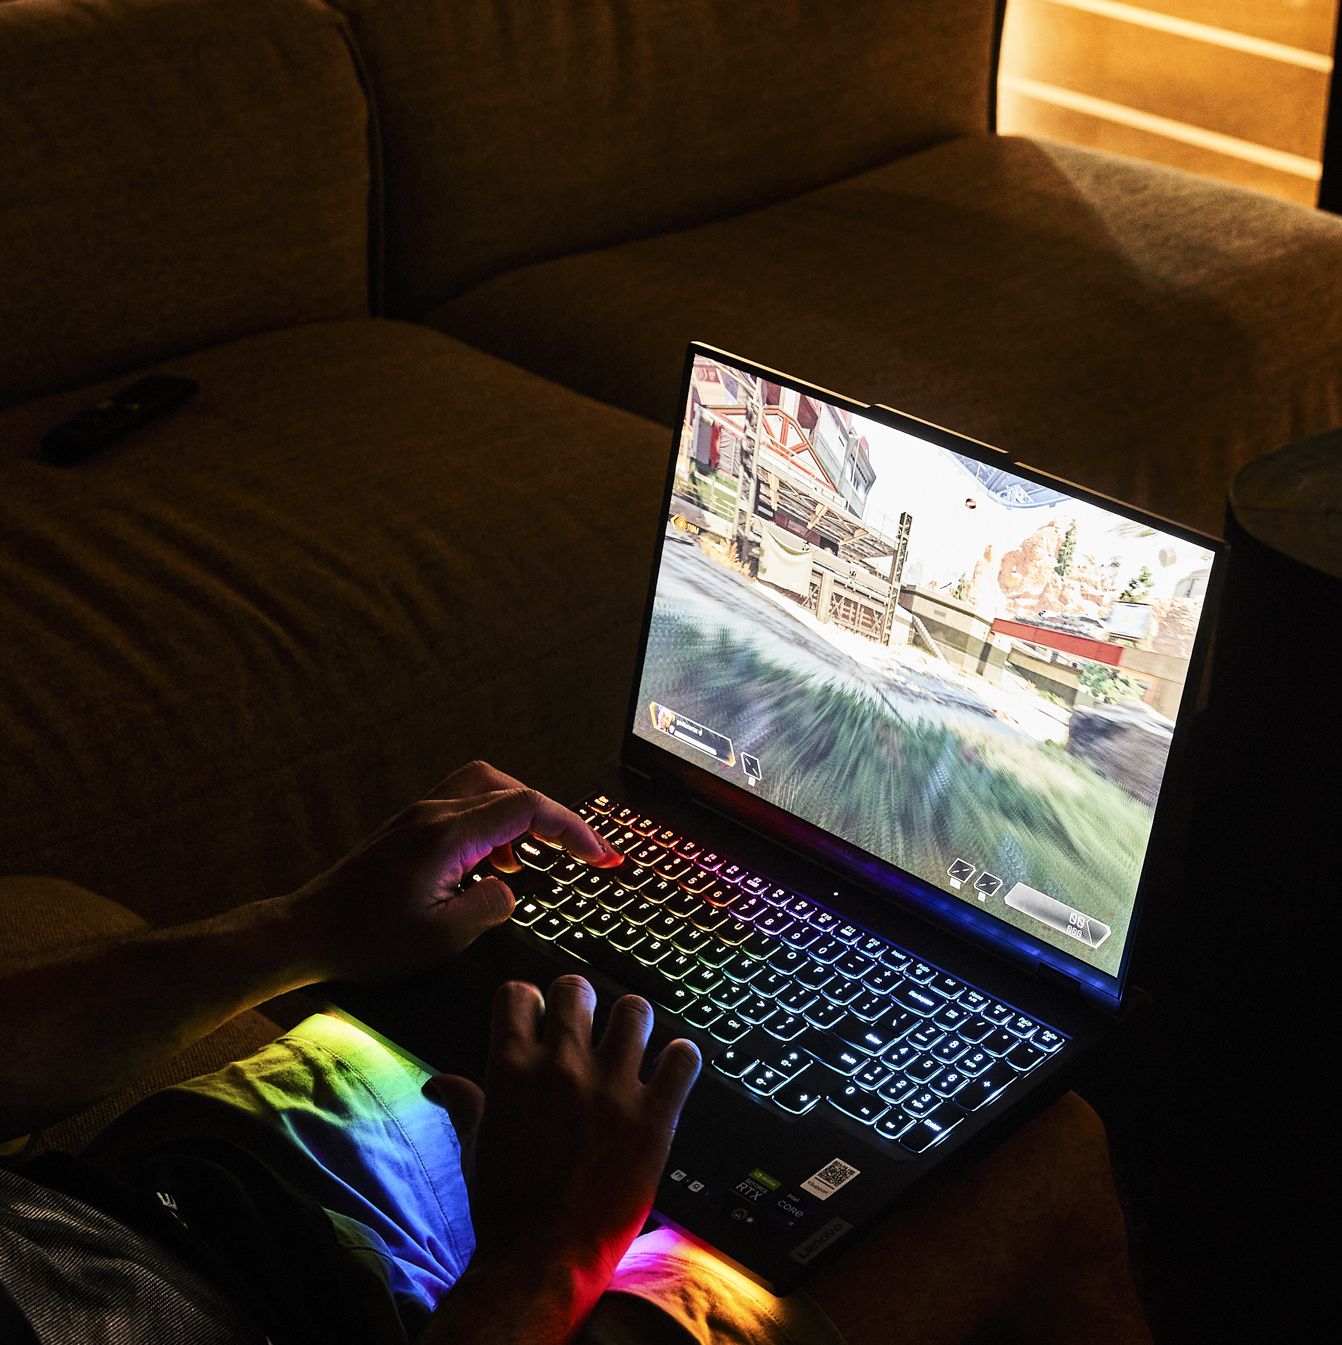 The Gaming Laptops Will Let You Play (Almost) Anything Anywhere